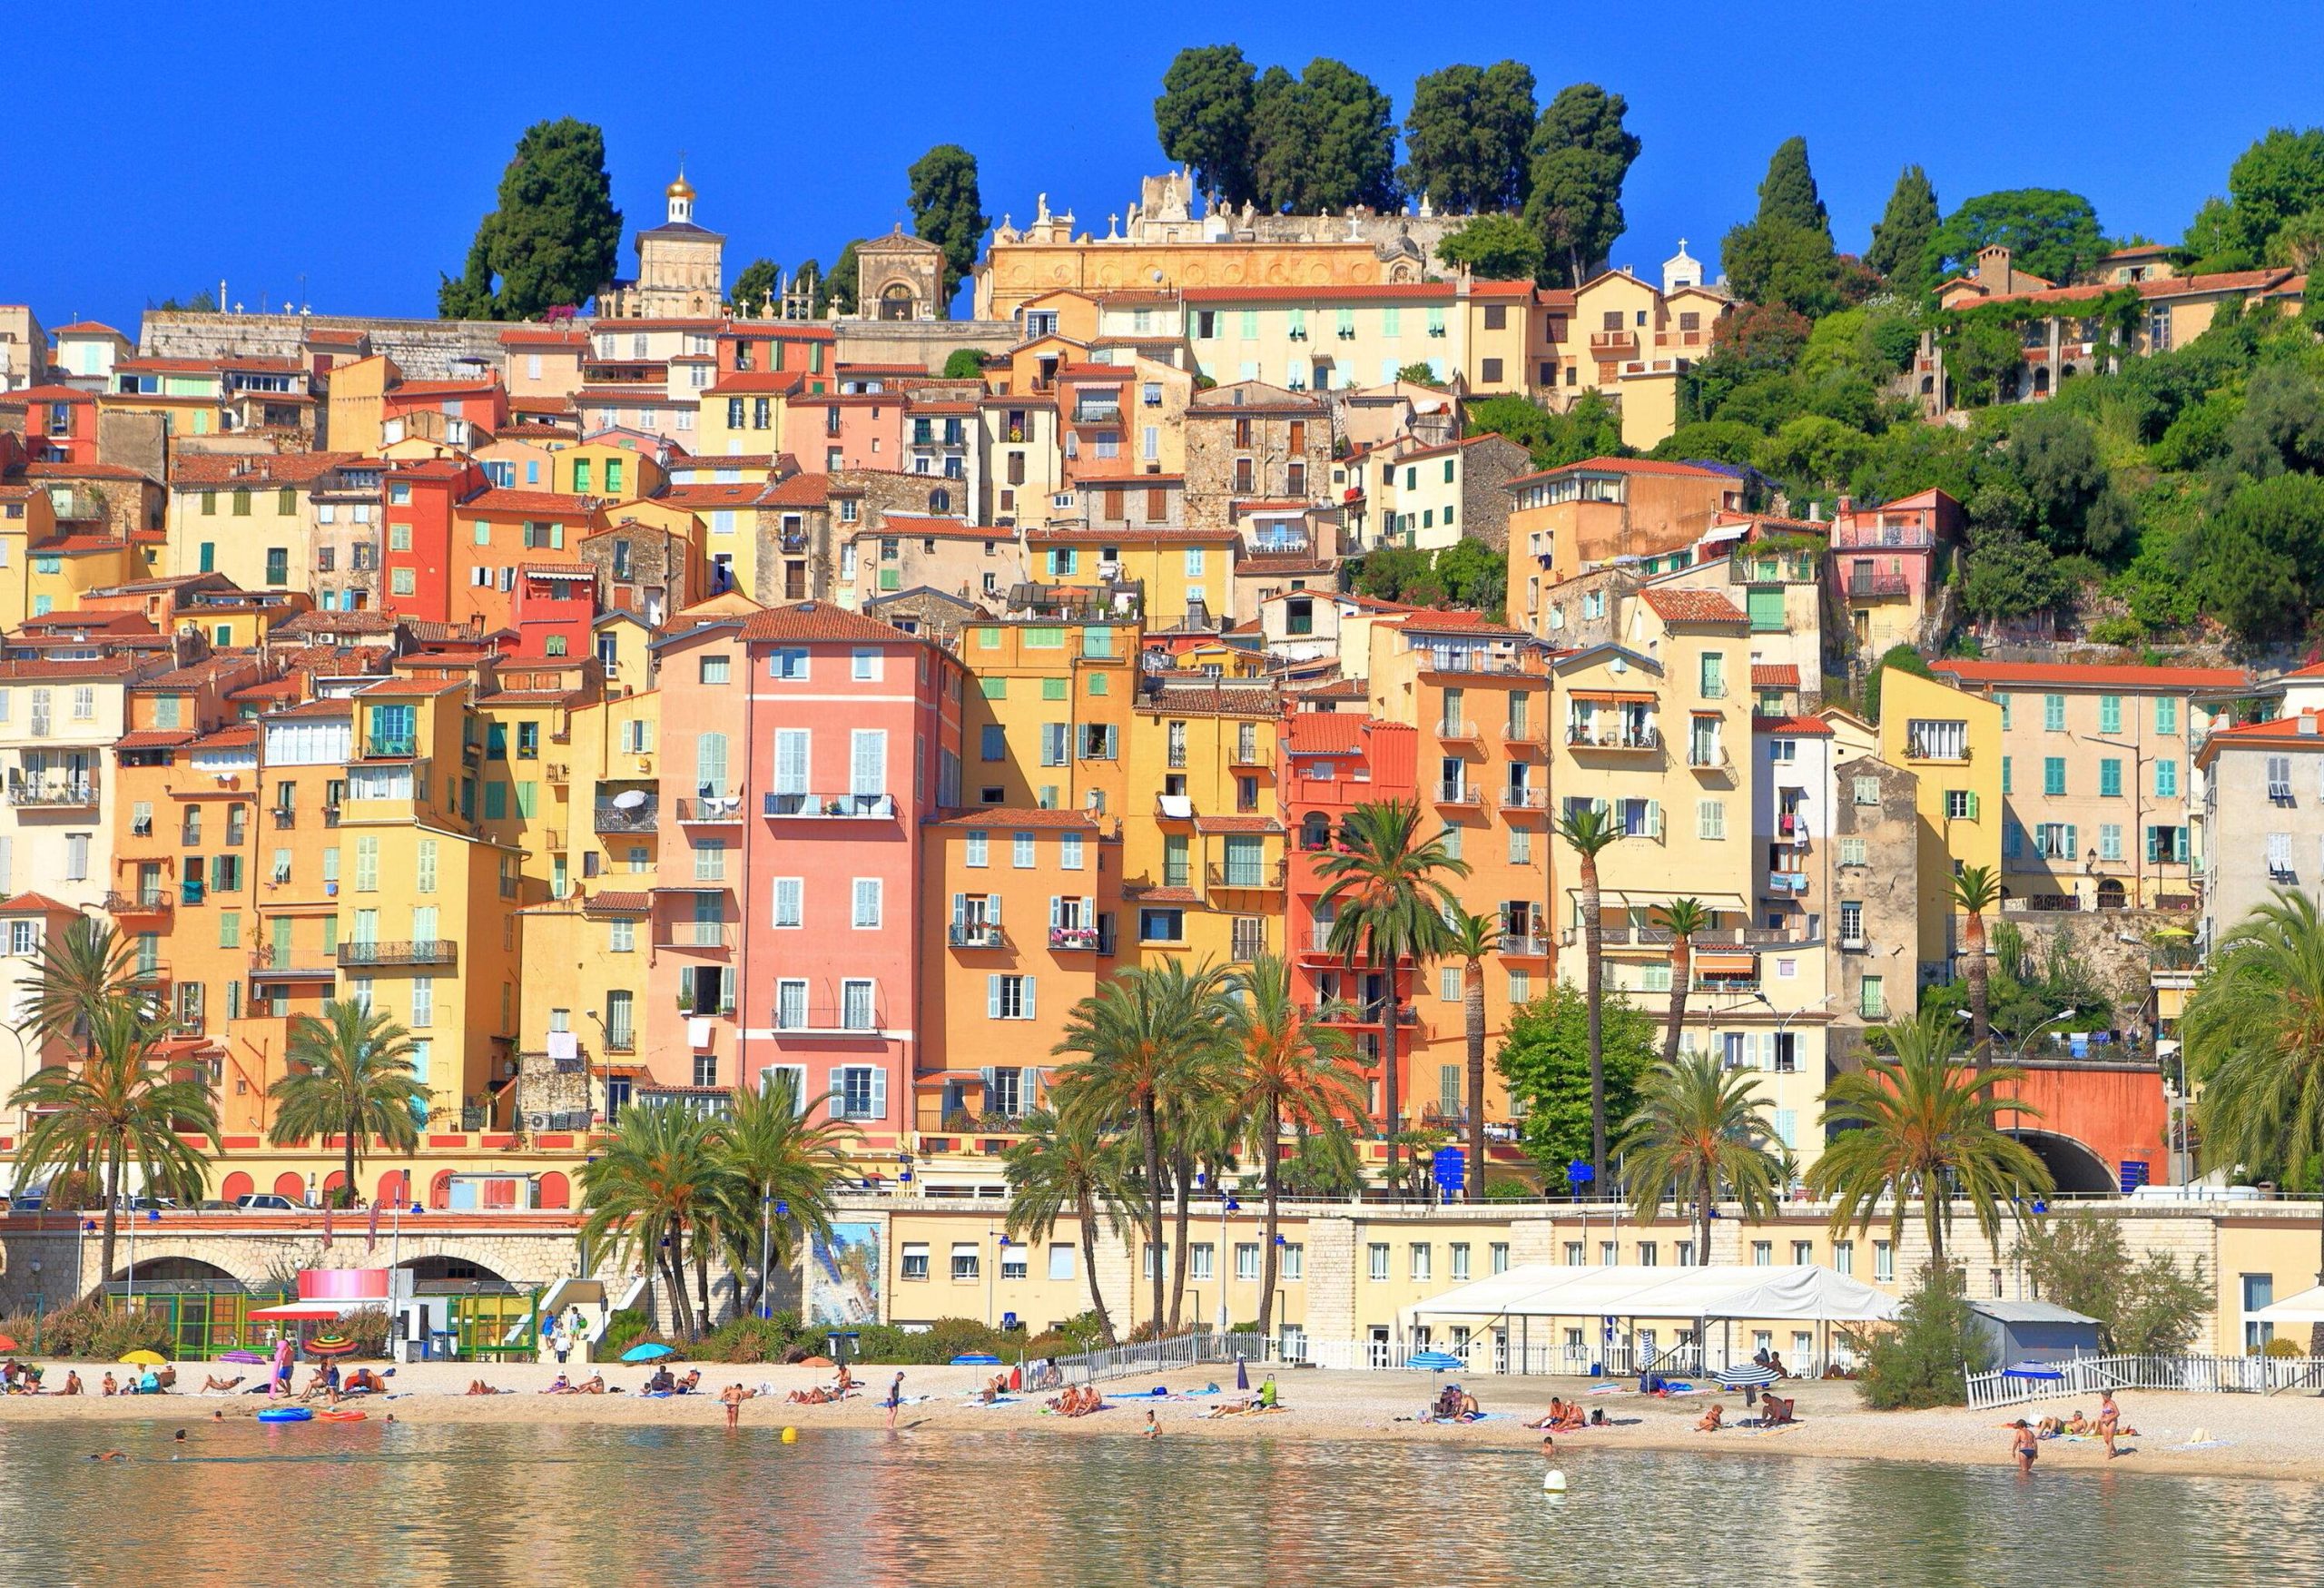 A picturesque medieval town by the beach with colourful buildings situated on a hill.